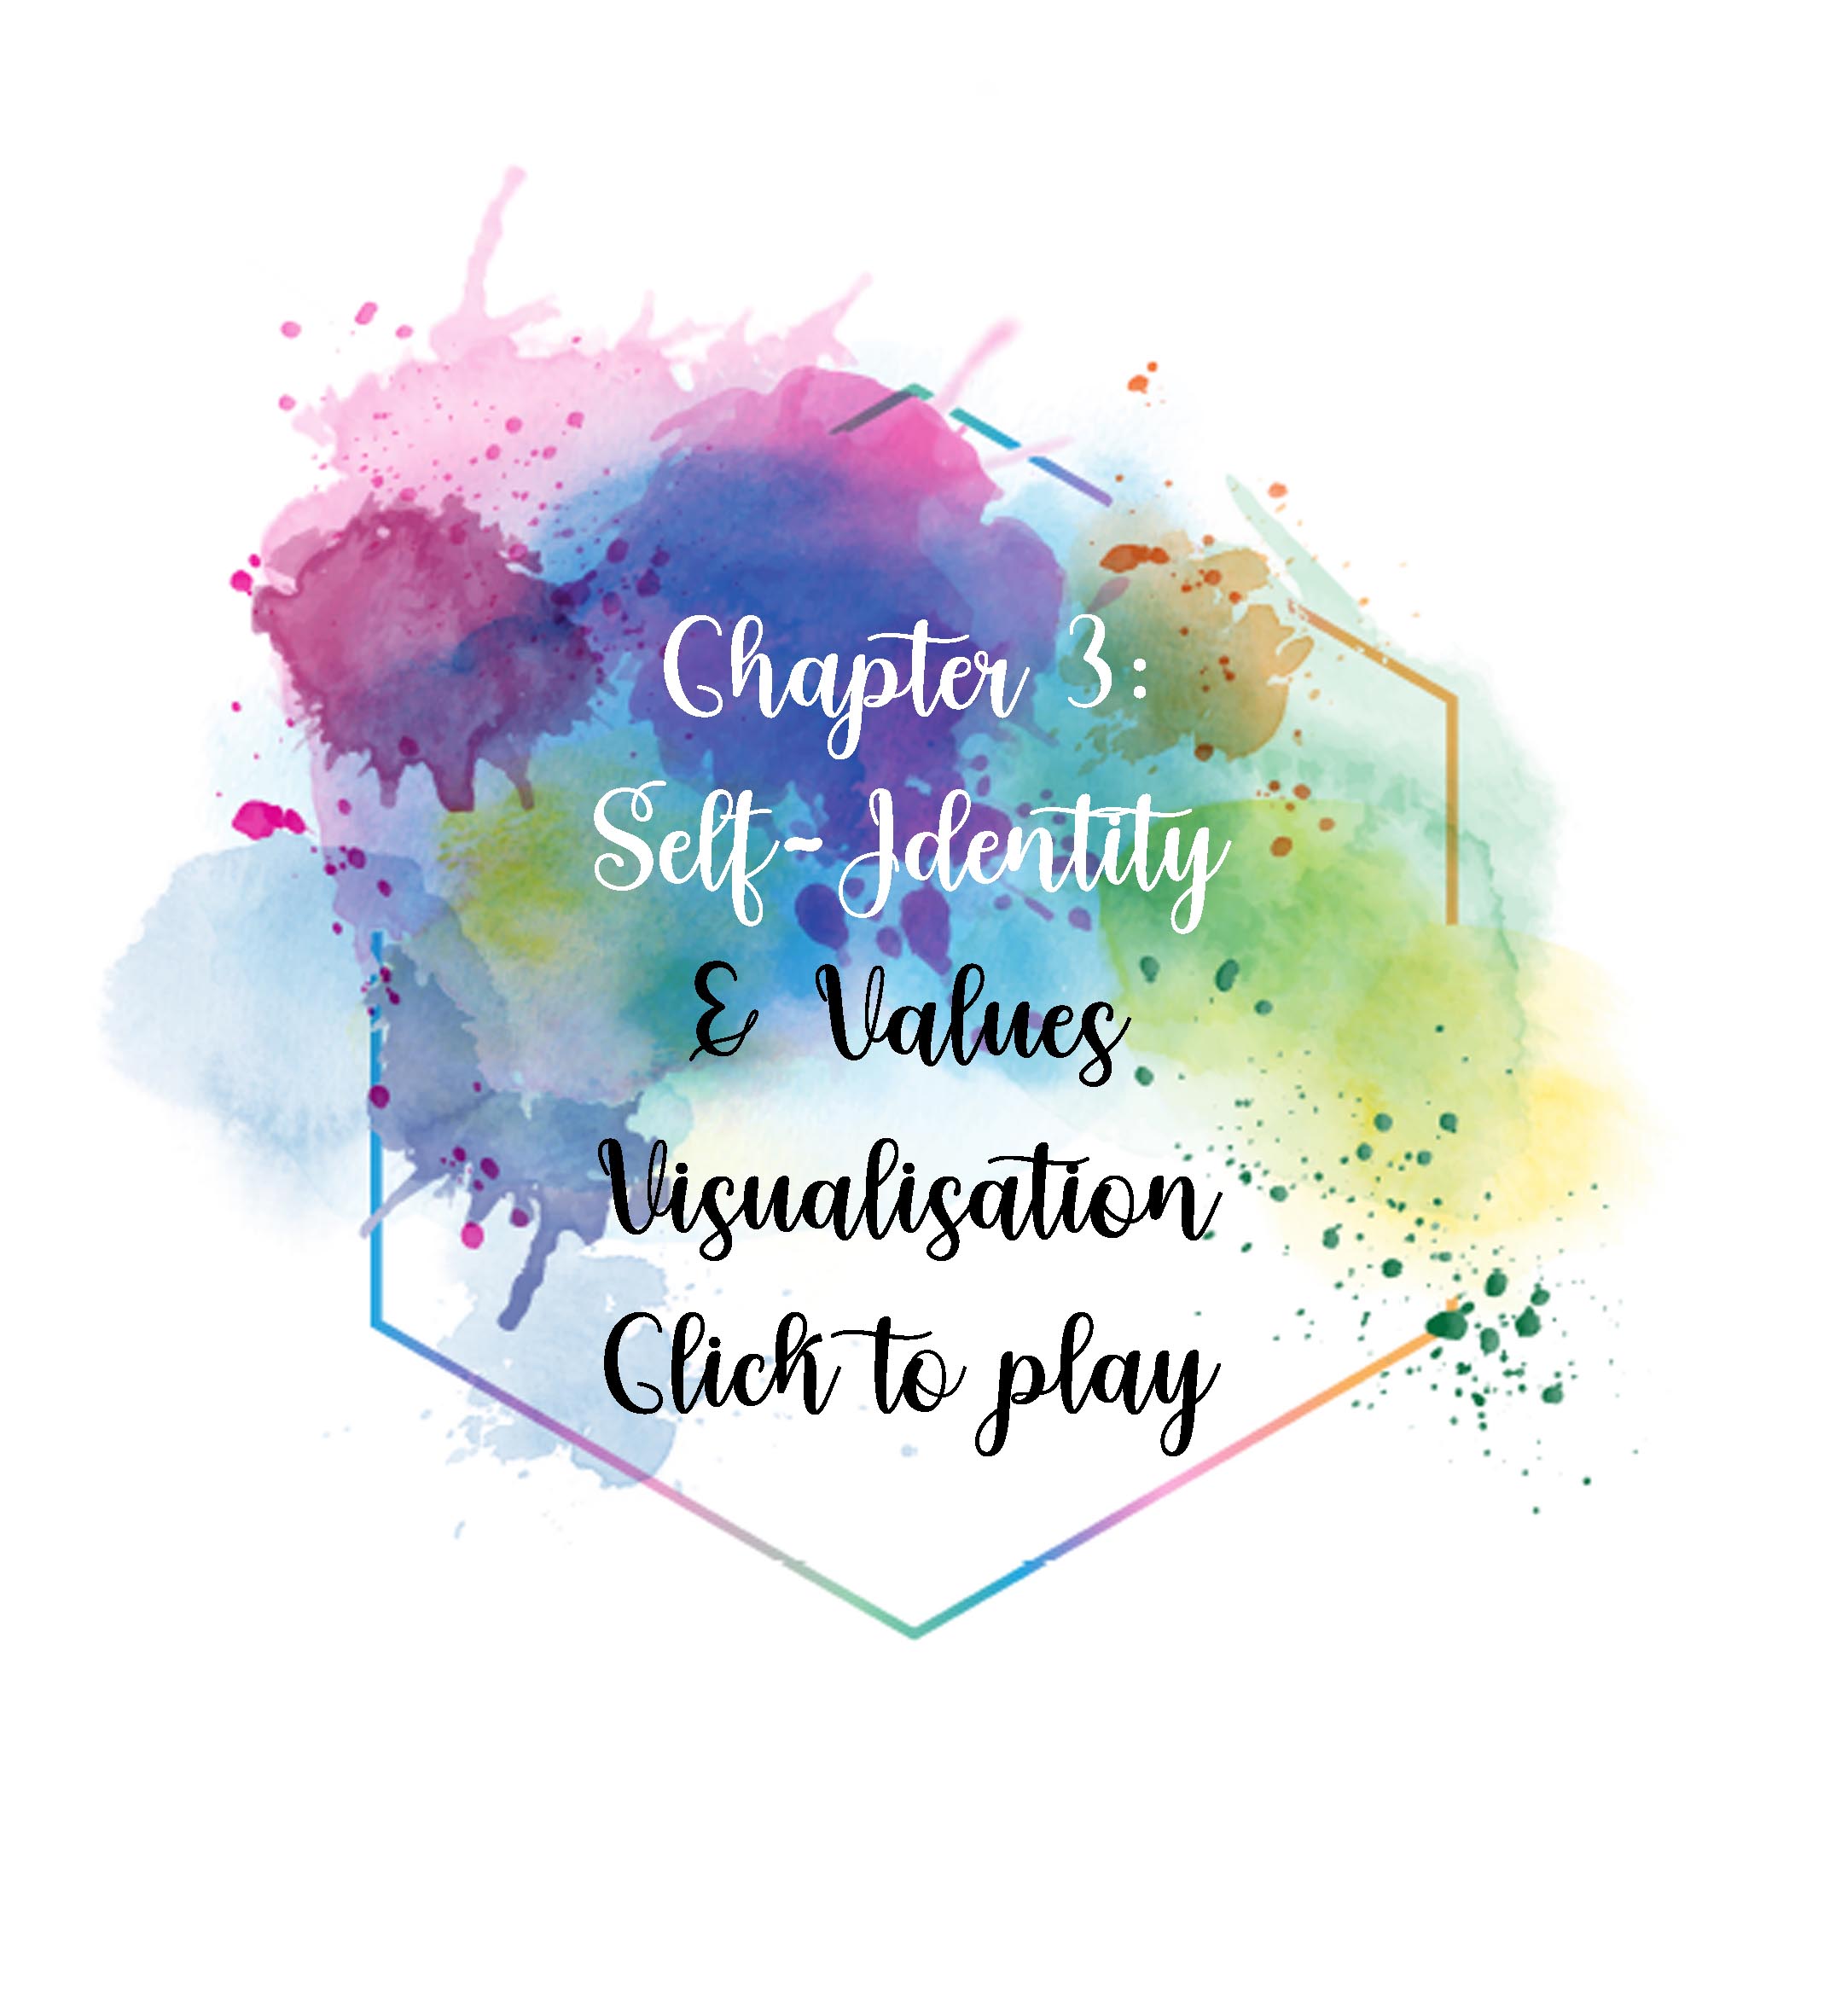 Chapter 3 Visualisation Click to Play